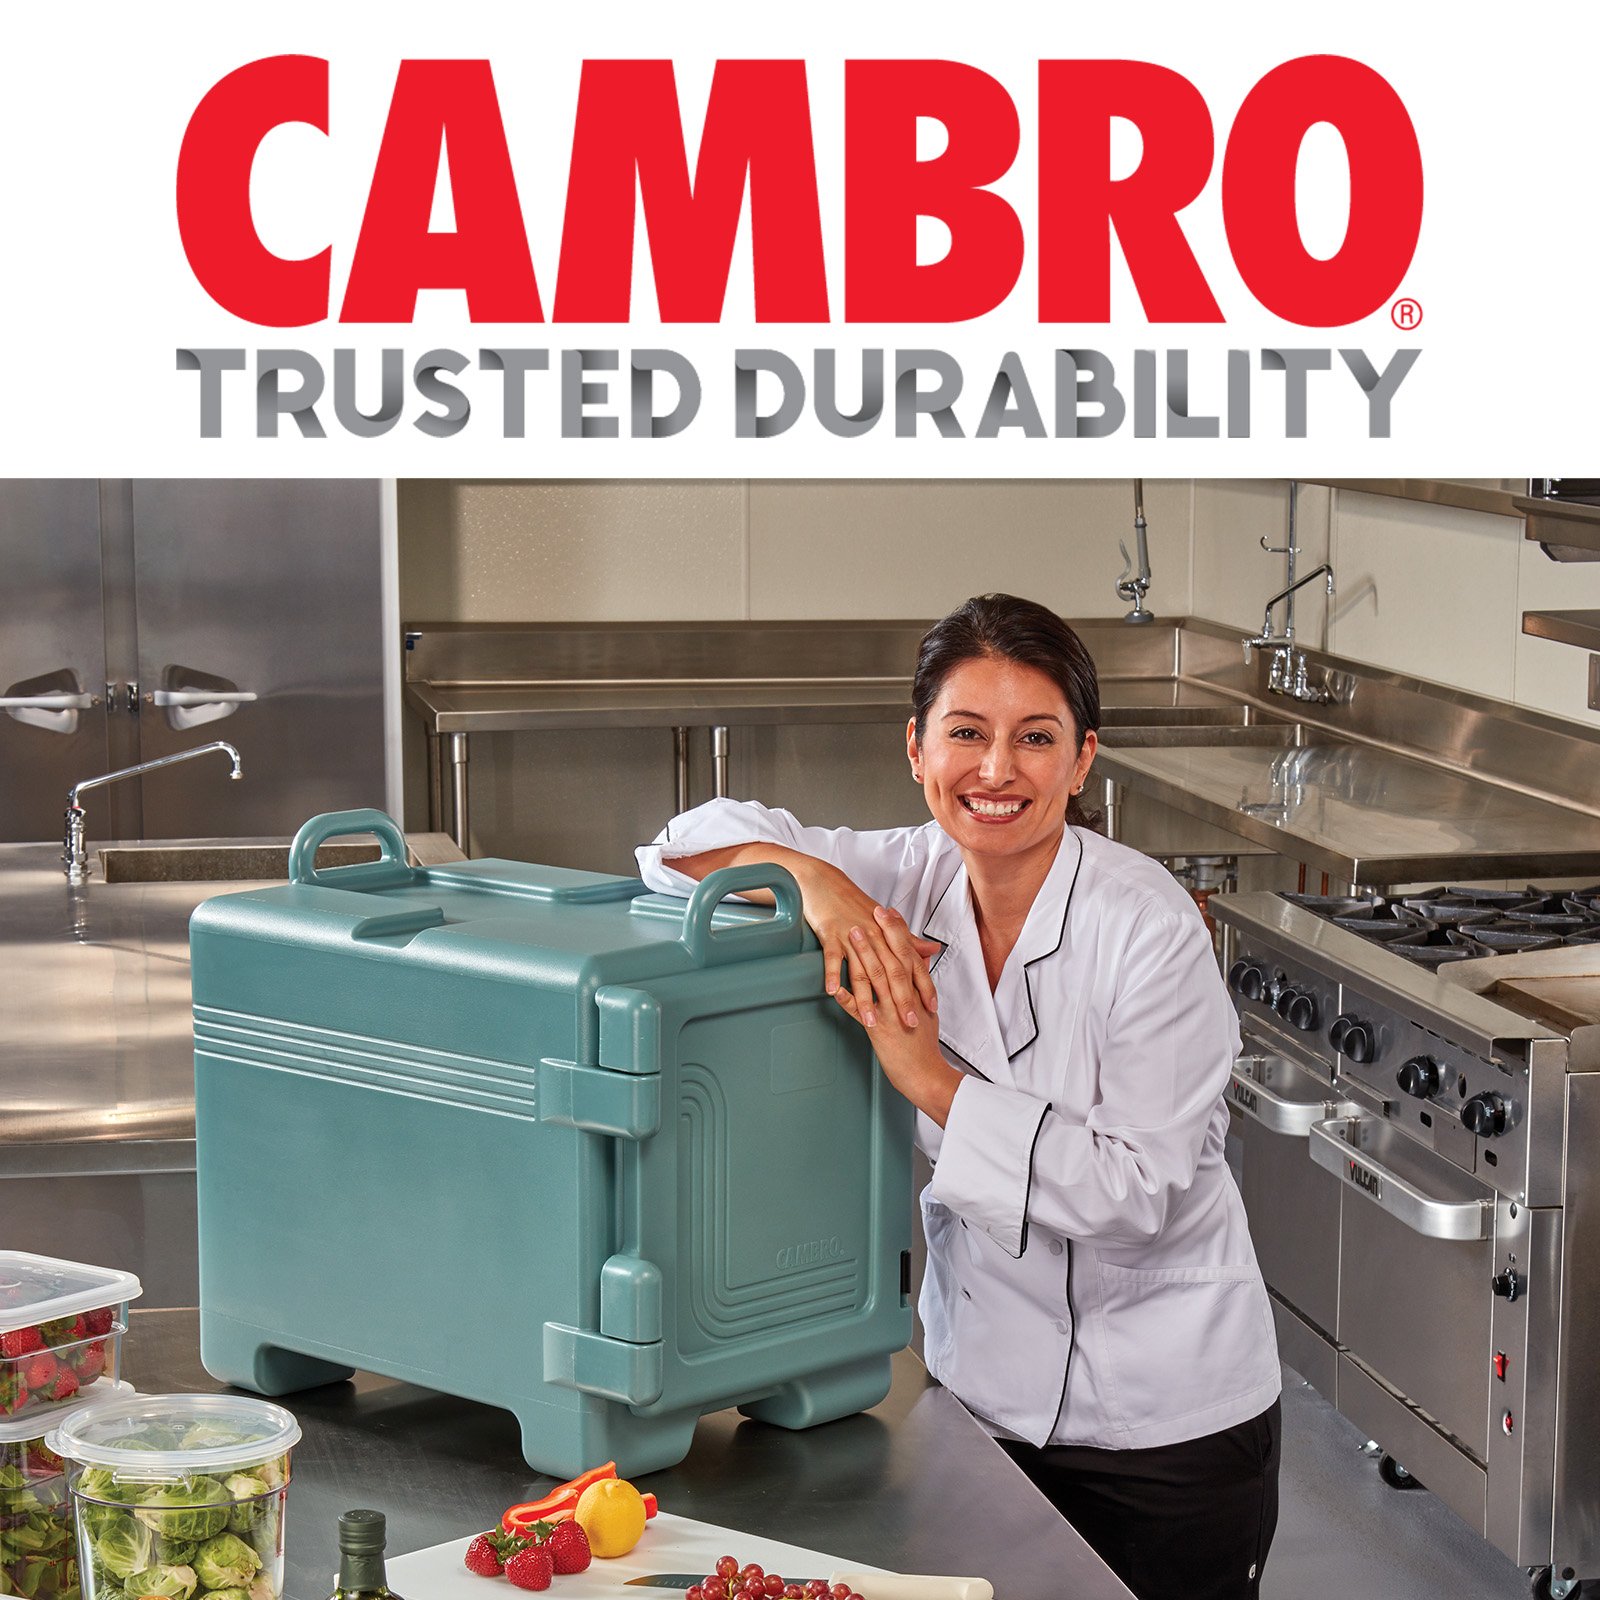 Cambro Manufacturing unveils new tagline: Trusted Durability